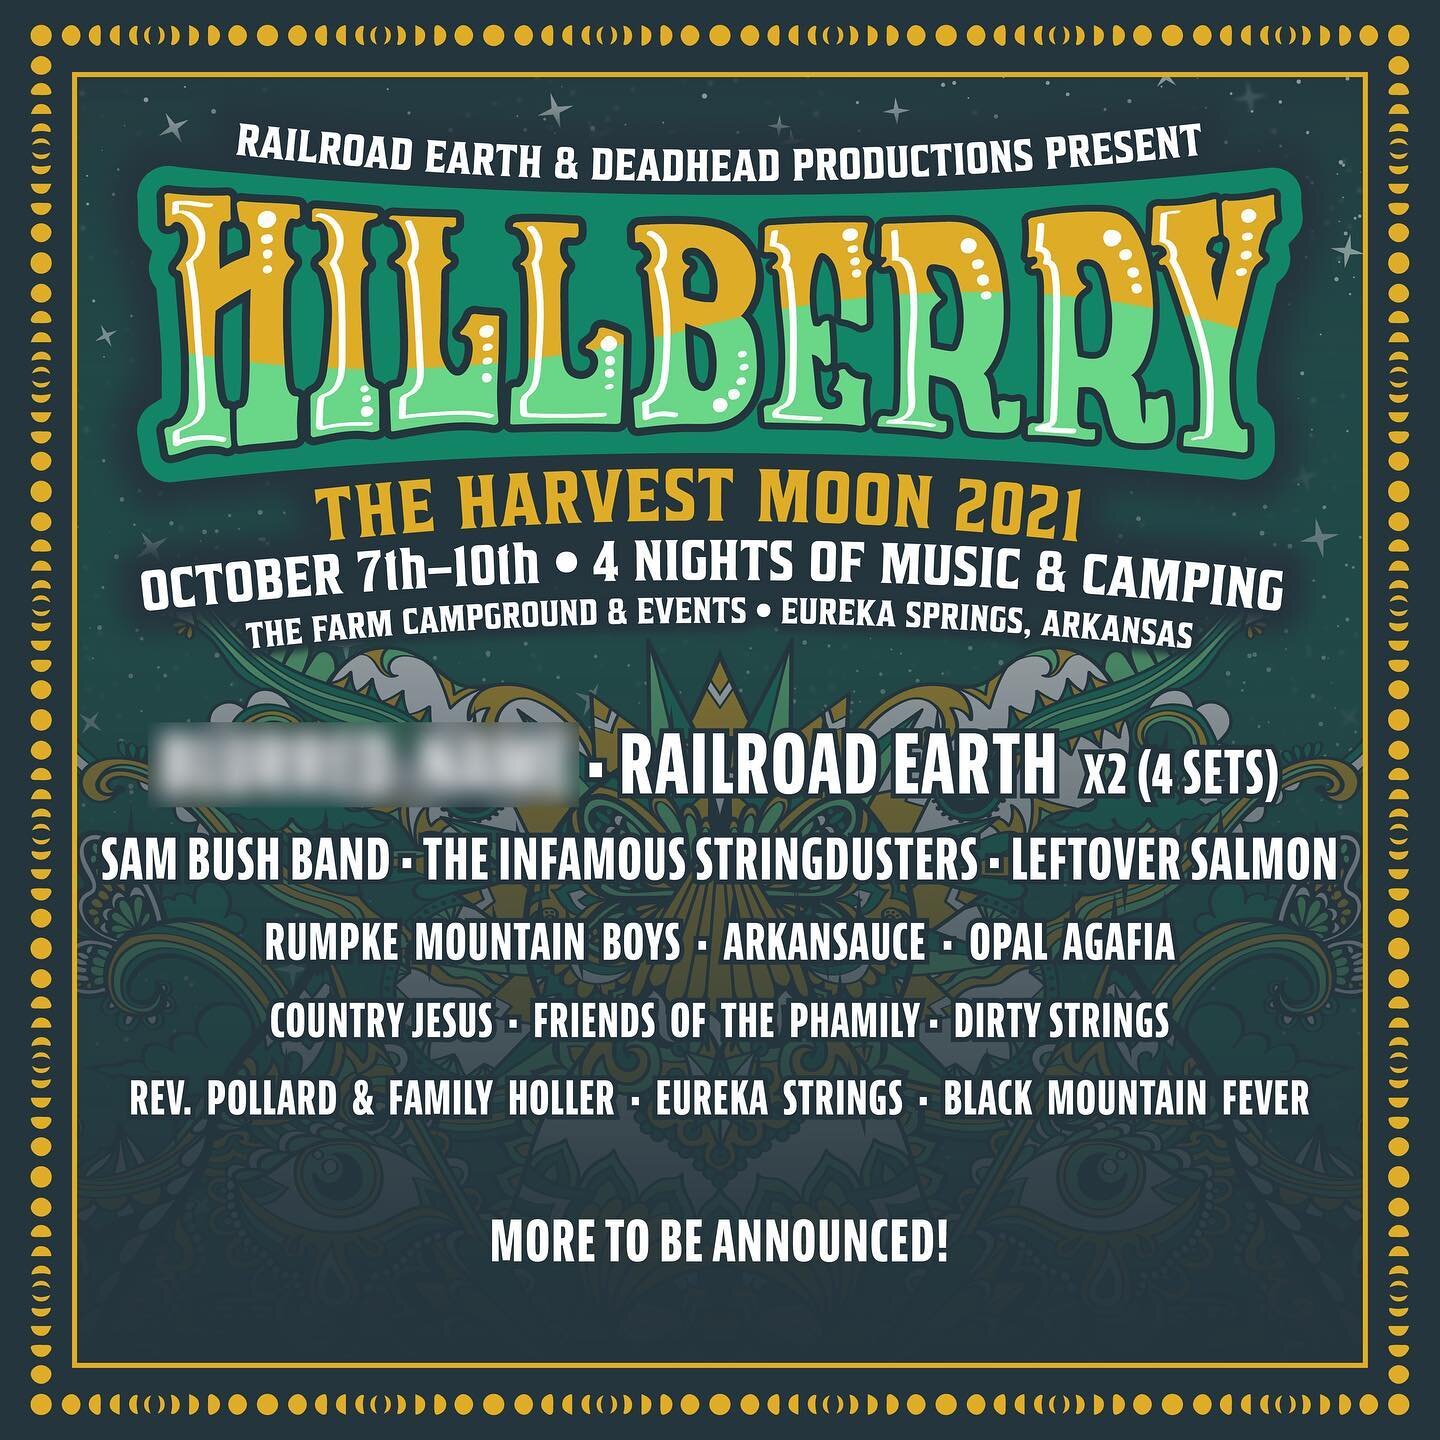 Sam is headed to the @hillberryfestival this October at the @thefarmcampgroundevents in Eureka Springs, Arkansas! More of the lineup to be announced! Tkts &amp; info here: https://stubs.net/event/3580/hillberry-music-festival-10-7-10-10-21
 
#sambush